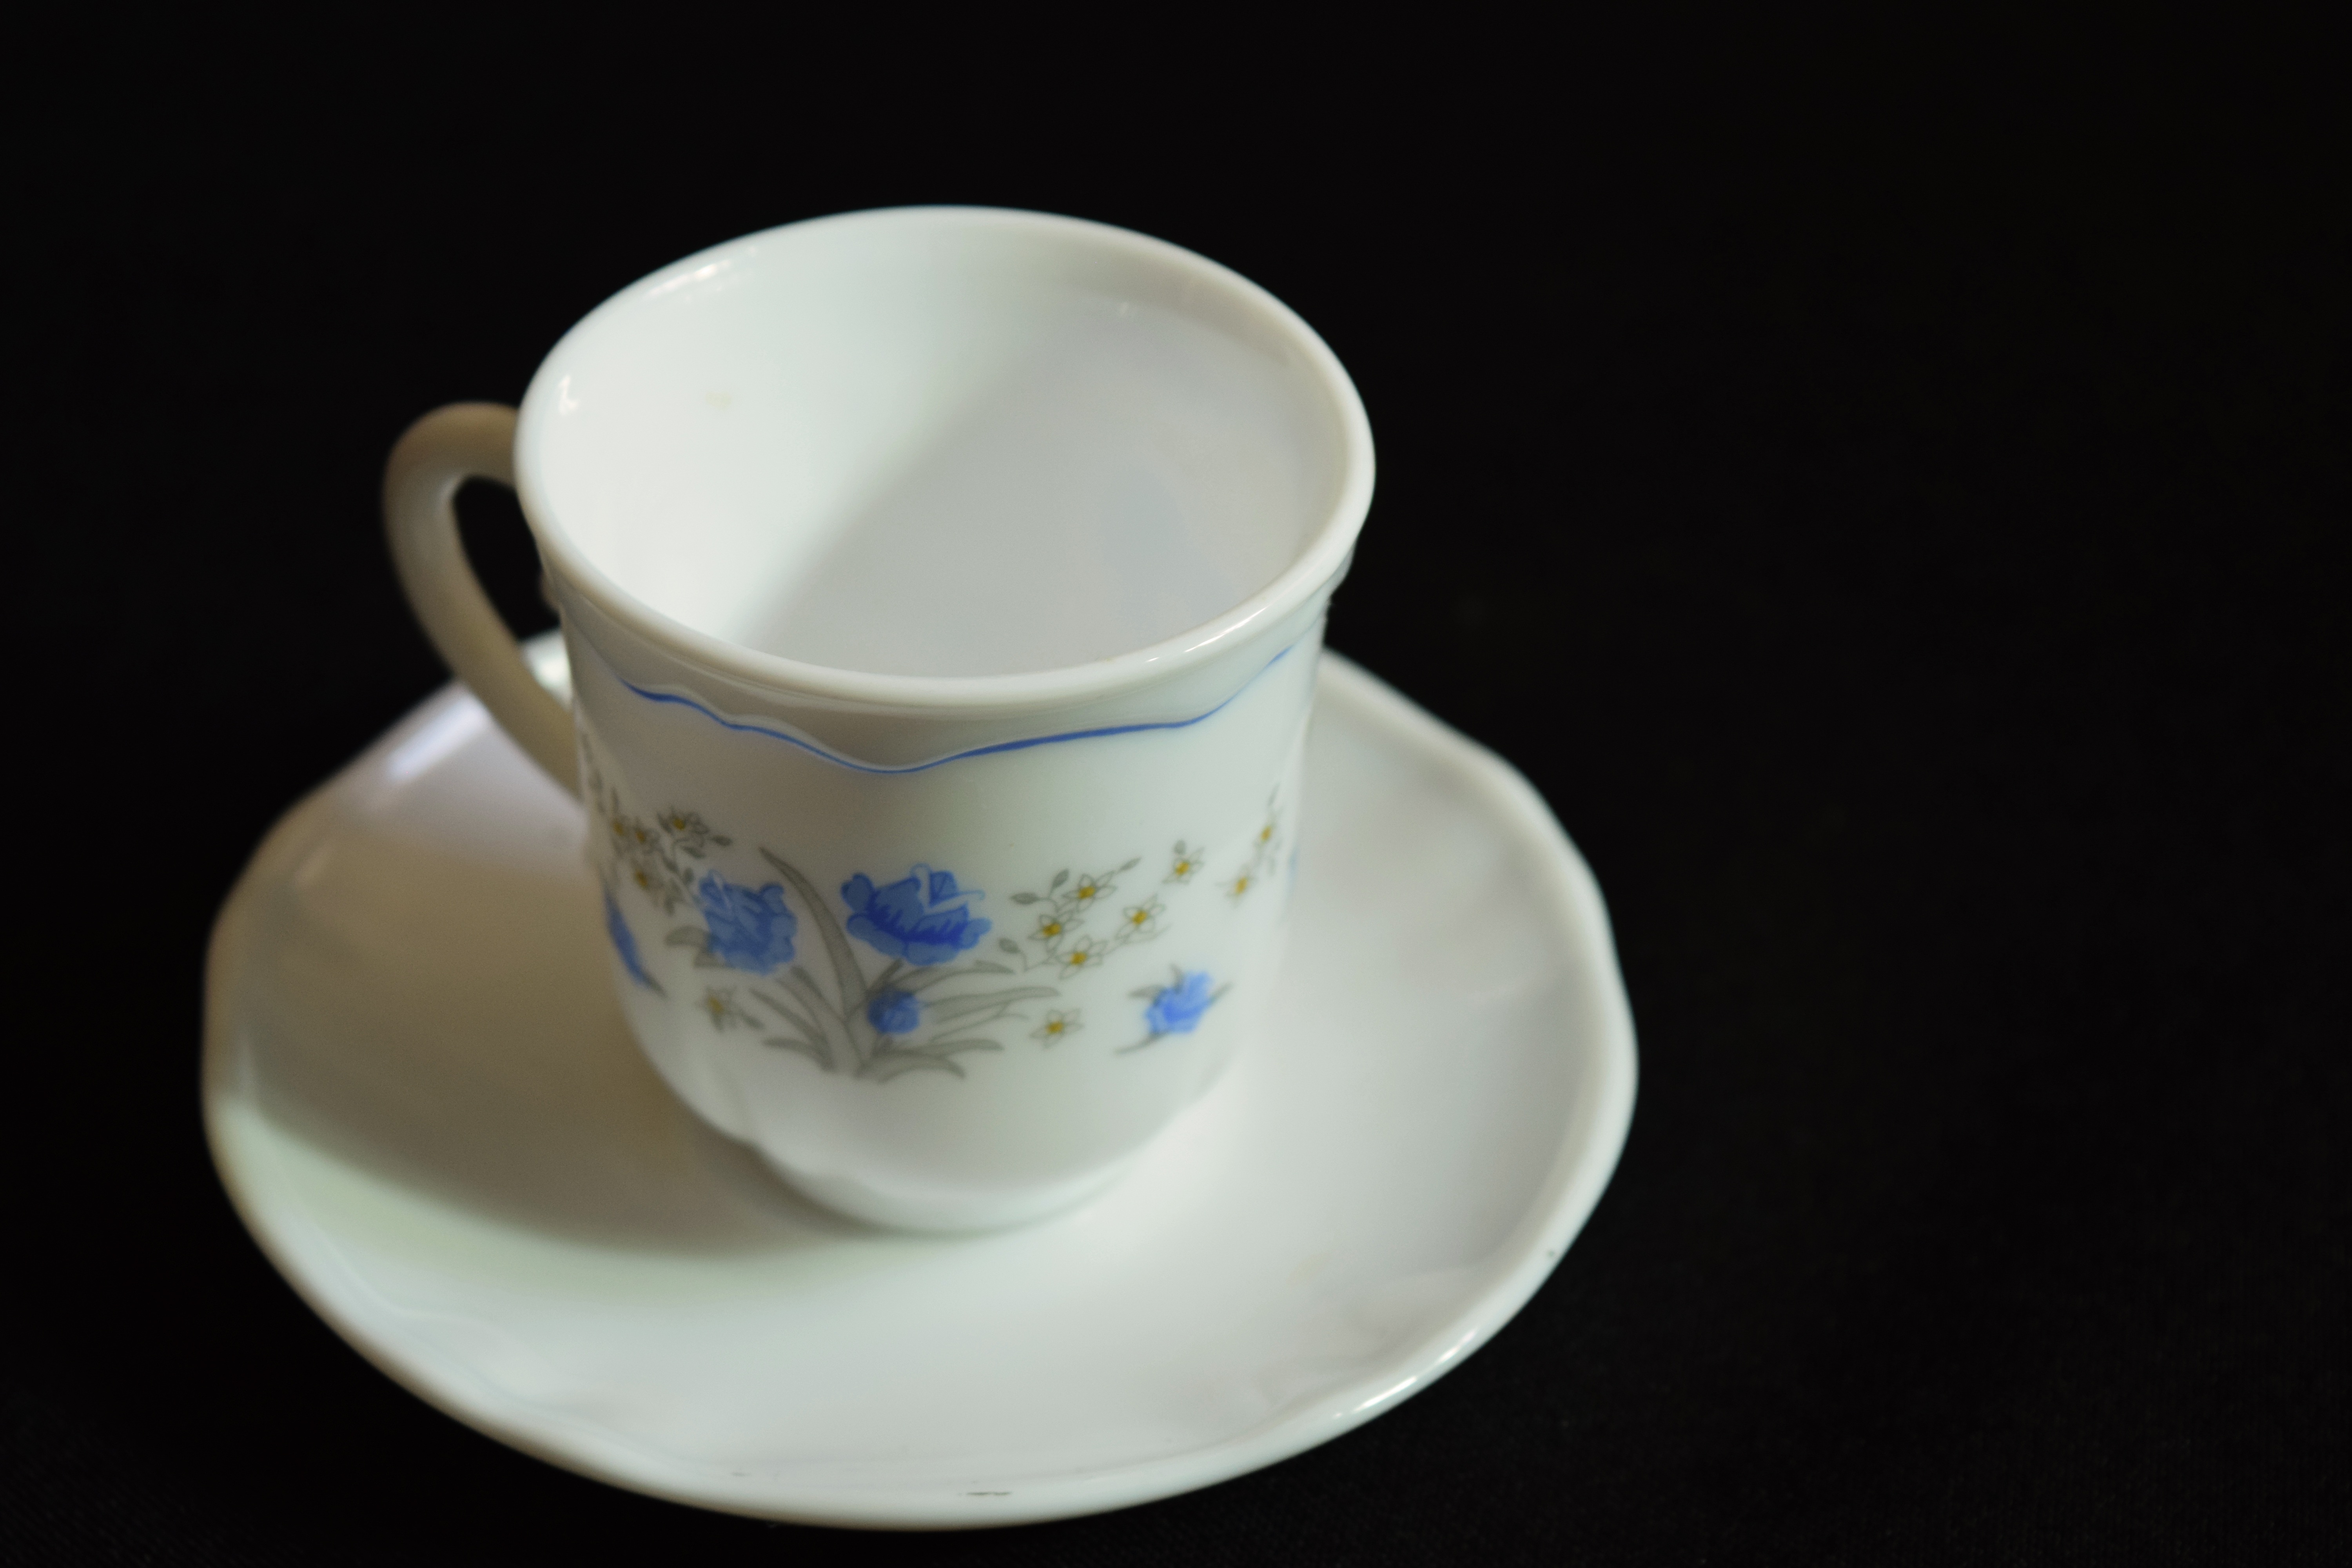 white and blue floral tea cup and saucer